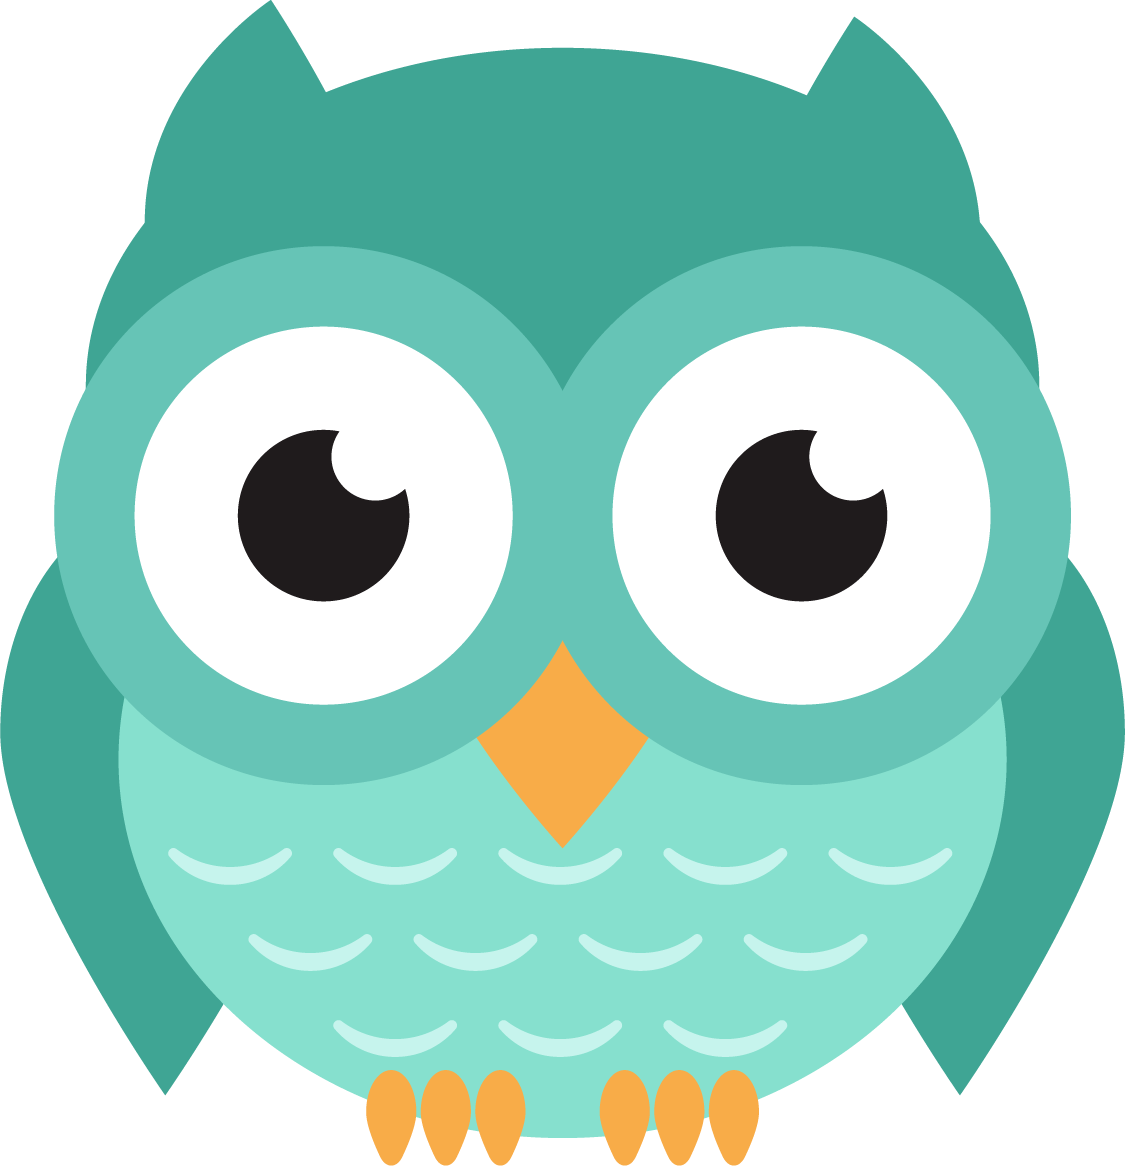 Png transparent free images. Ear clipart owl